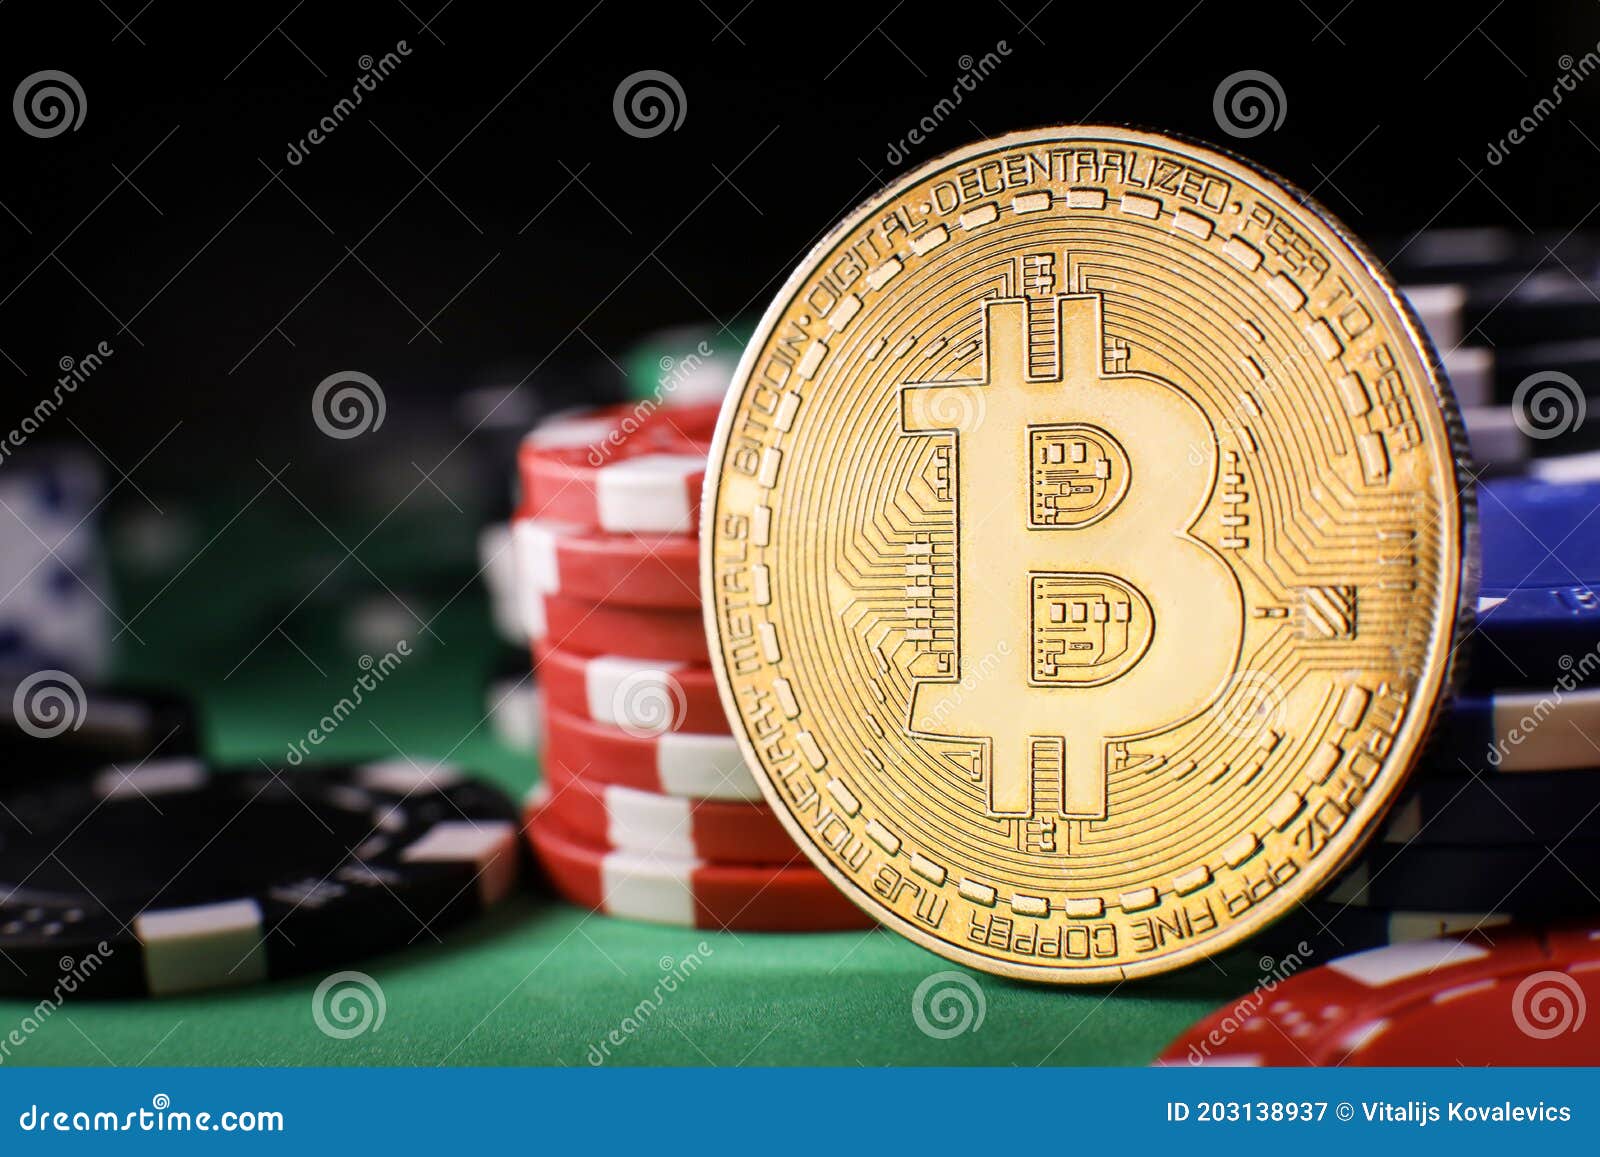 What Could crypto casino Do To Make You Switch?